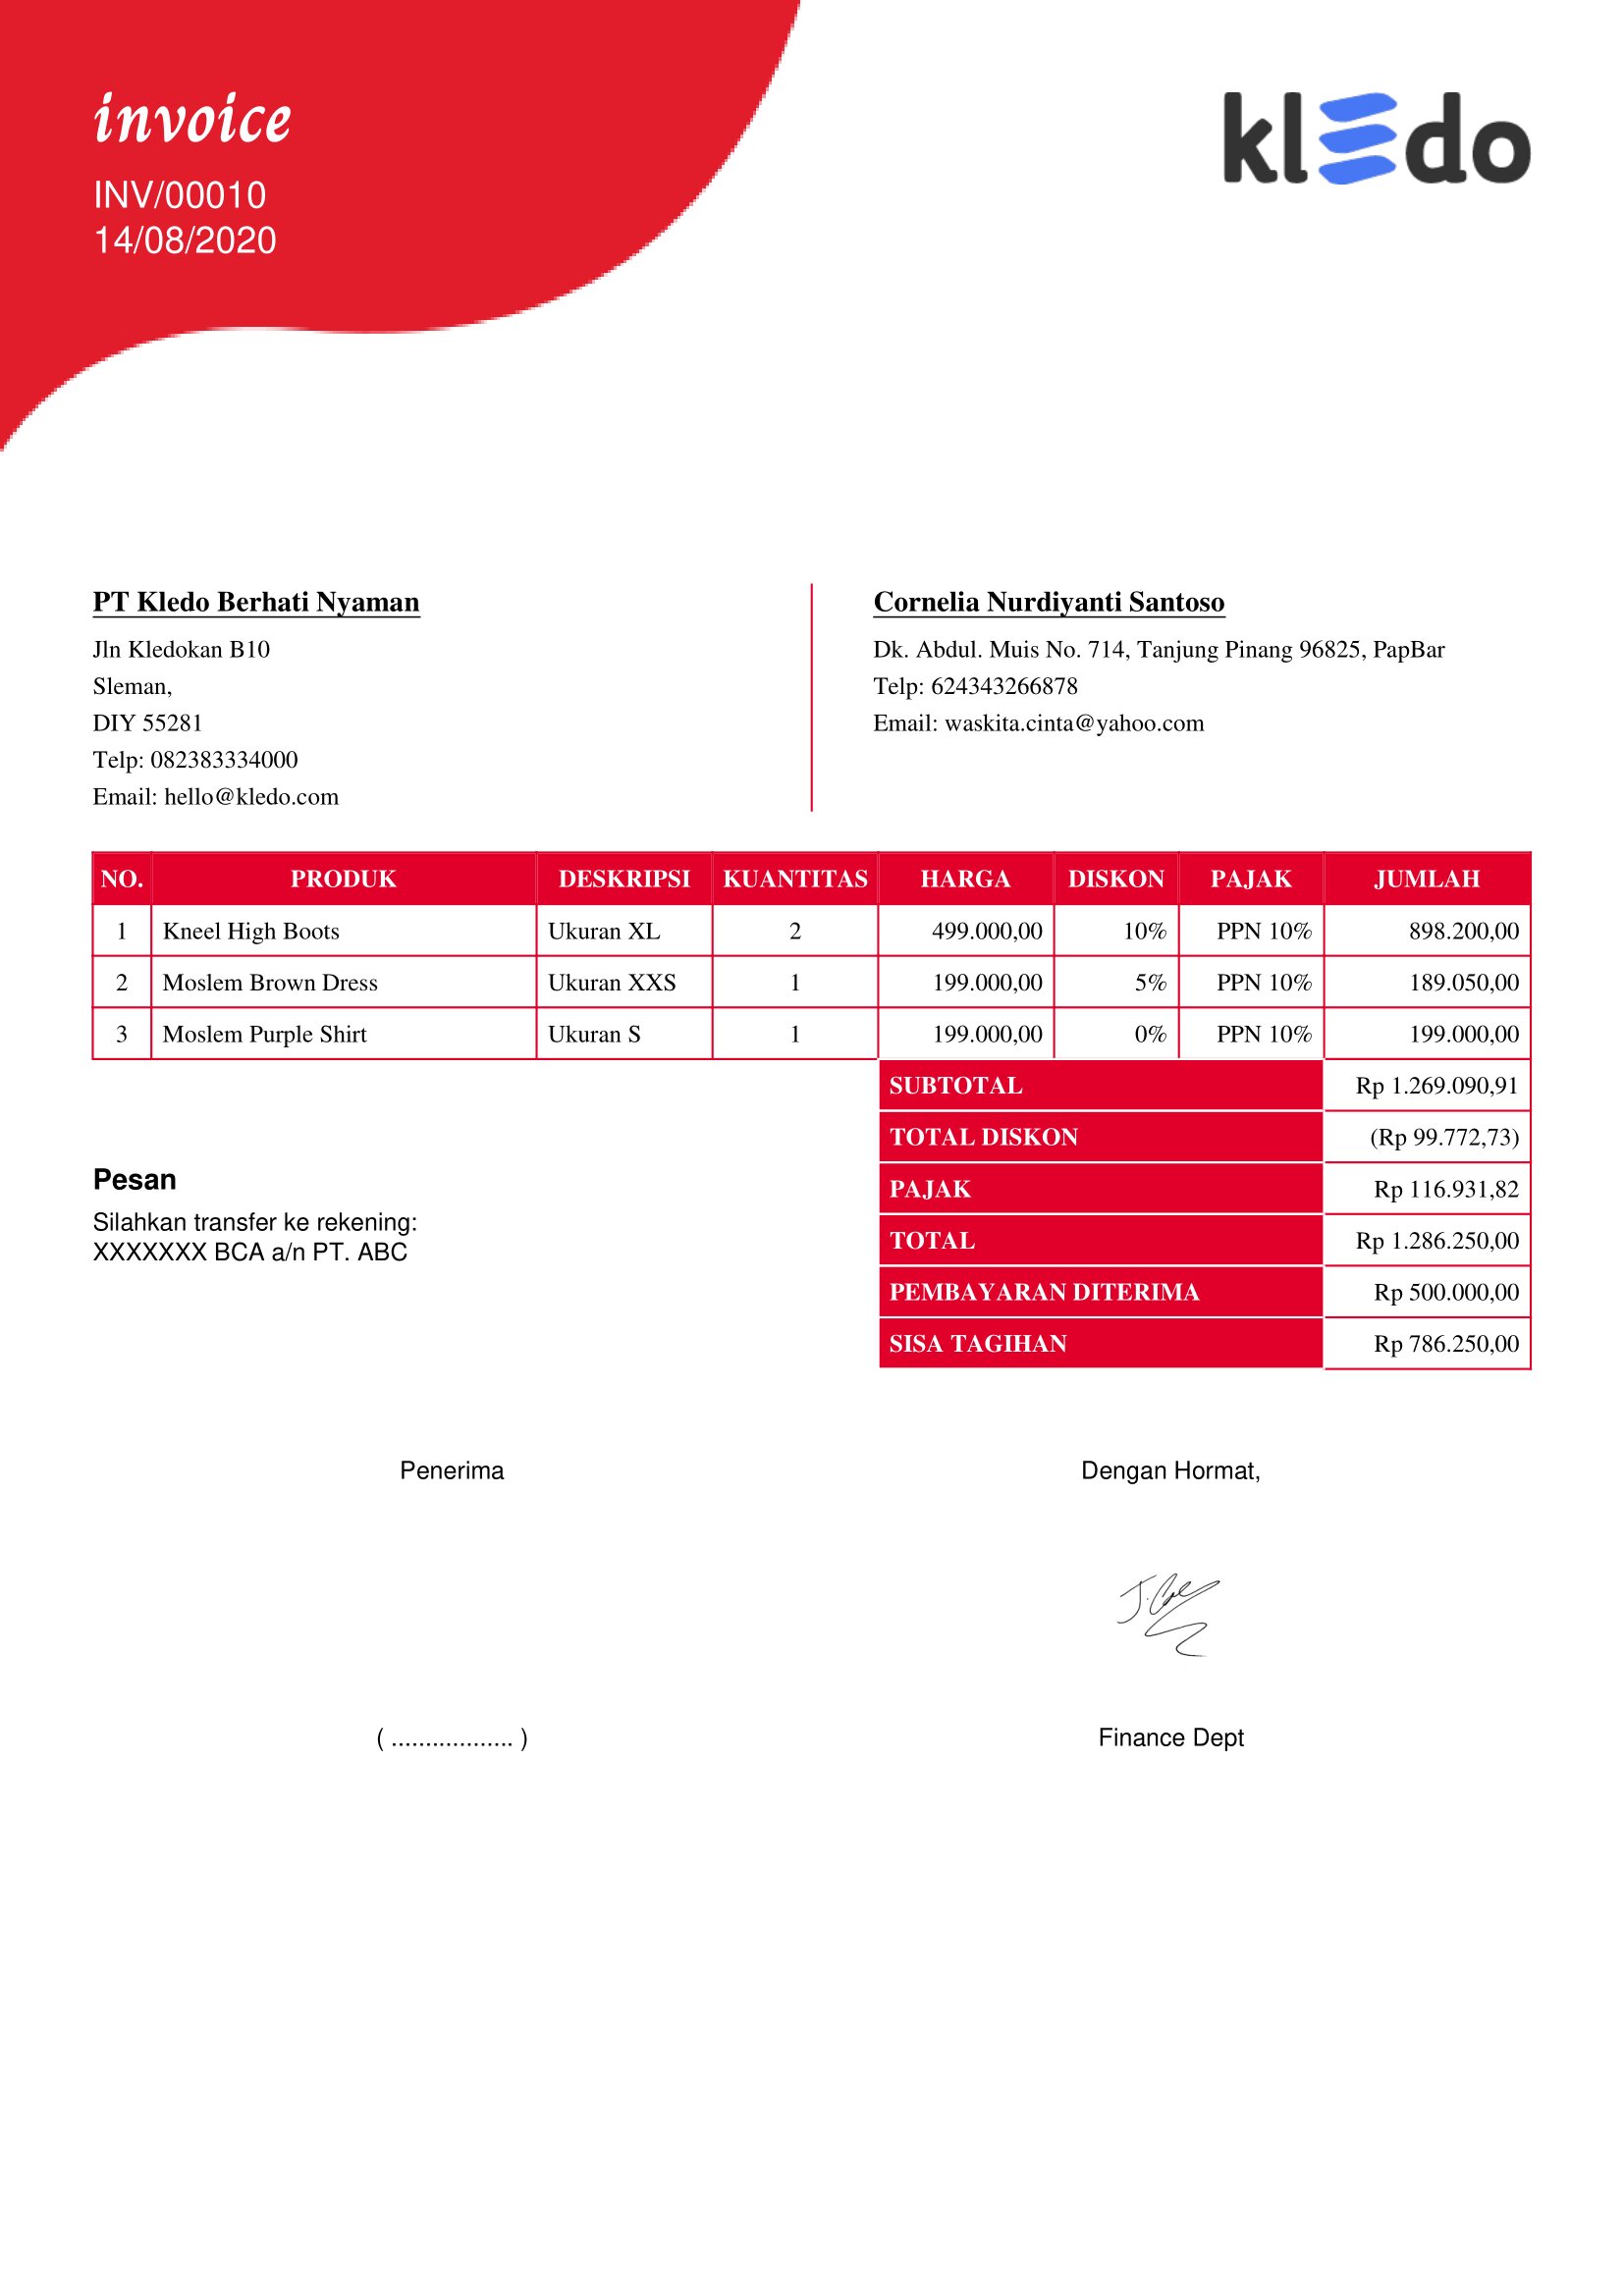 Detail Contoh Format Invoice Nomer 33